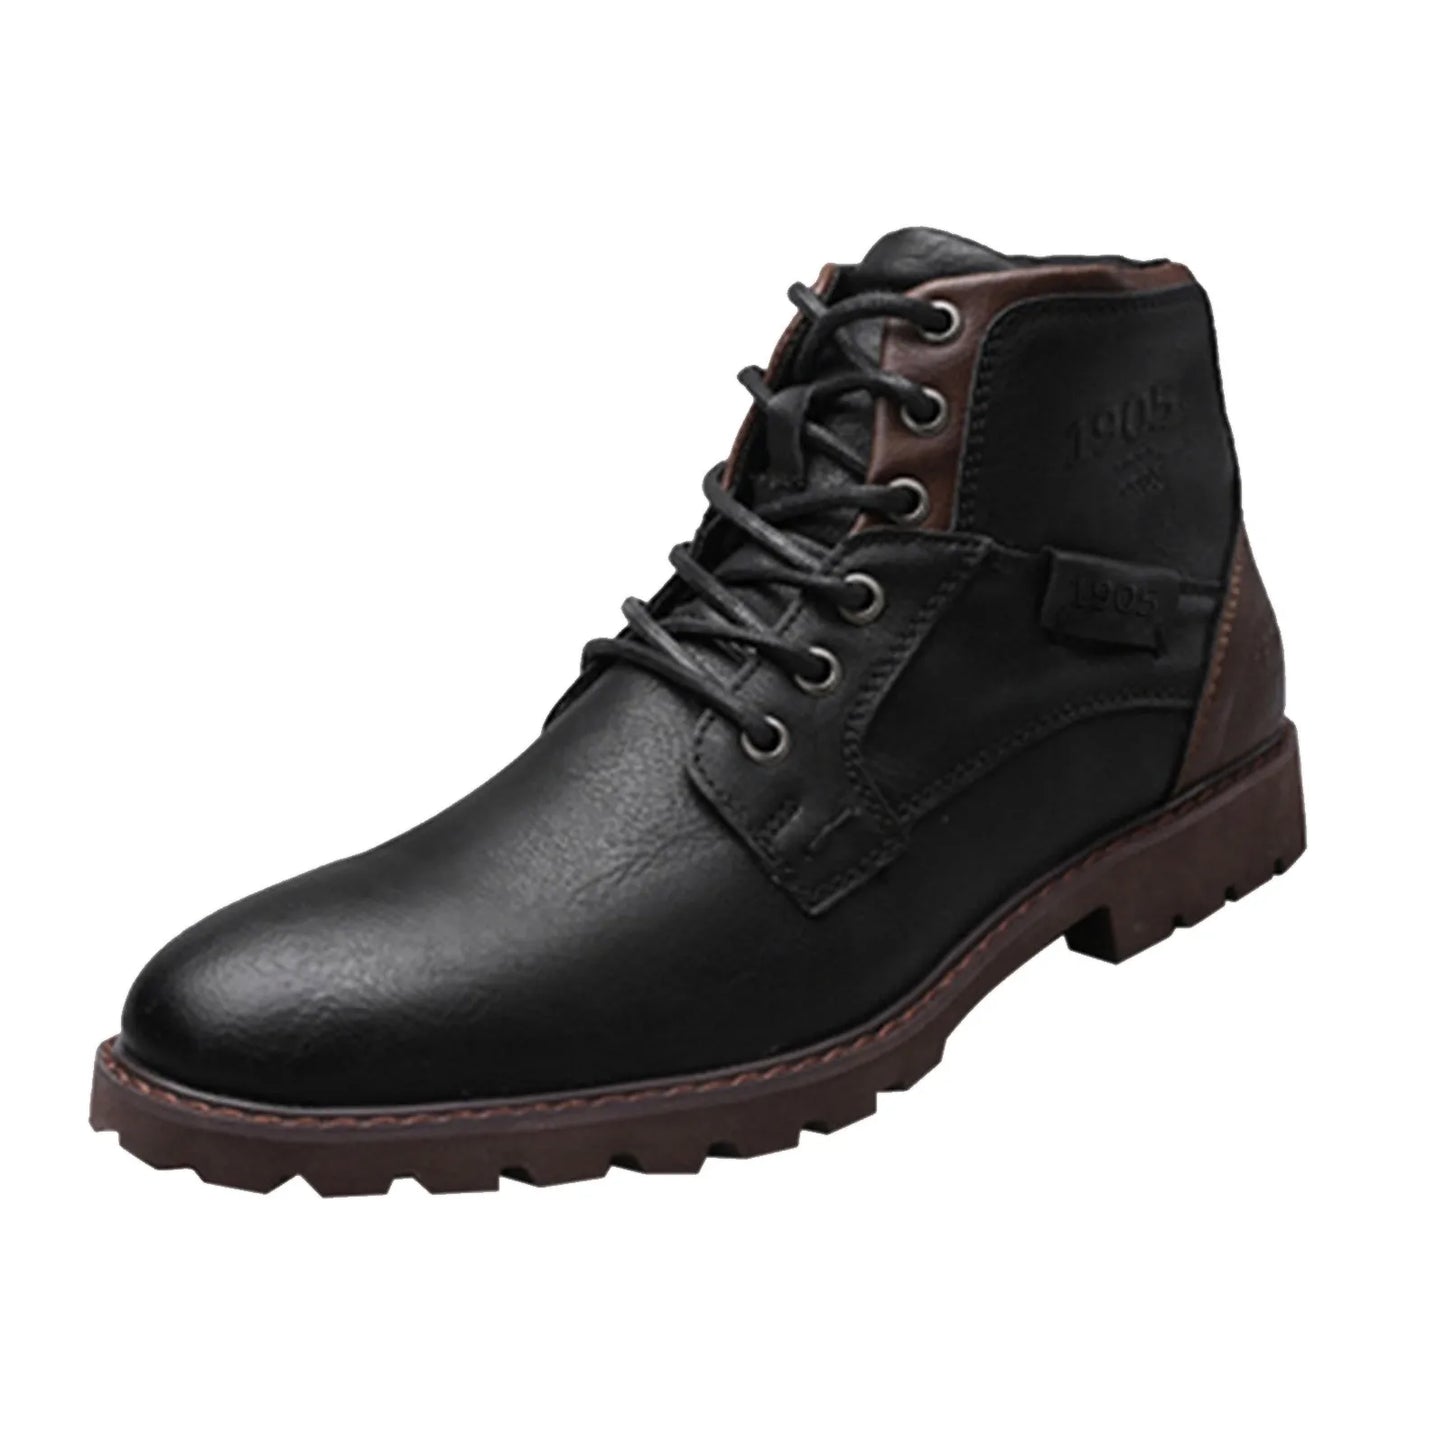 High-top Tooling Boots